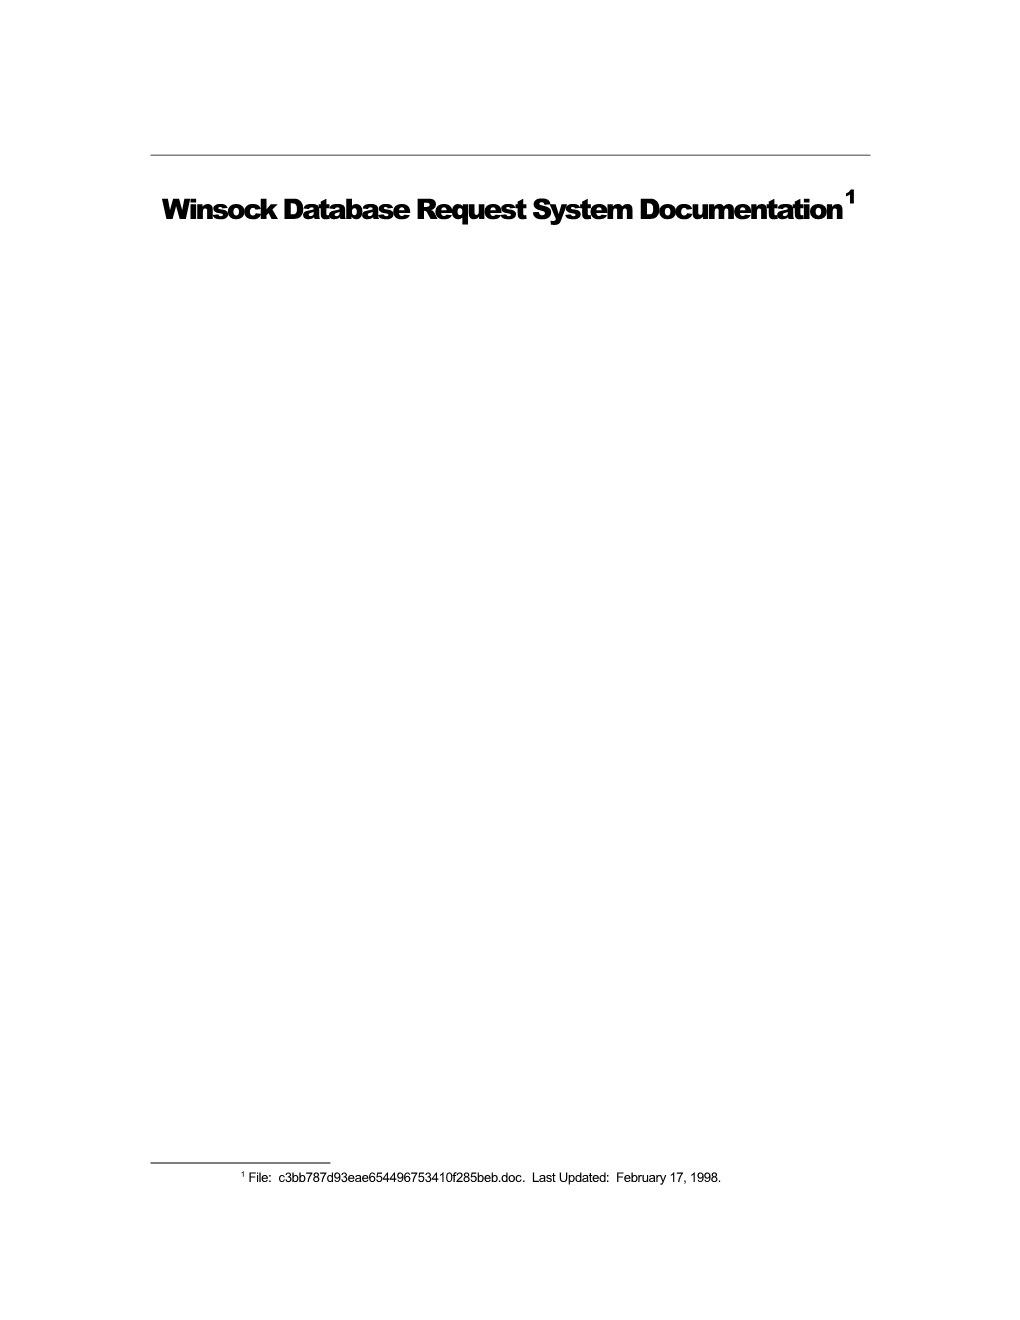 Winsock Database Request System Documentation